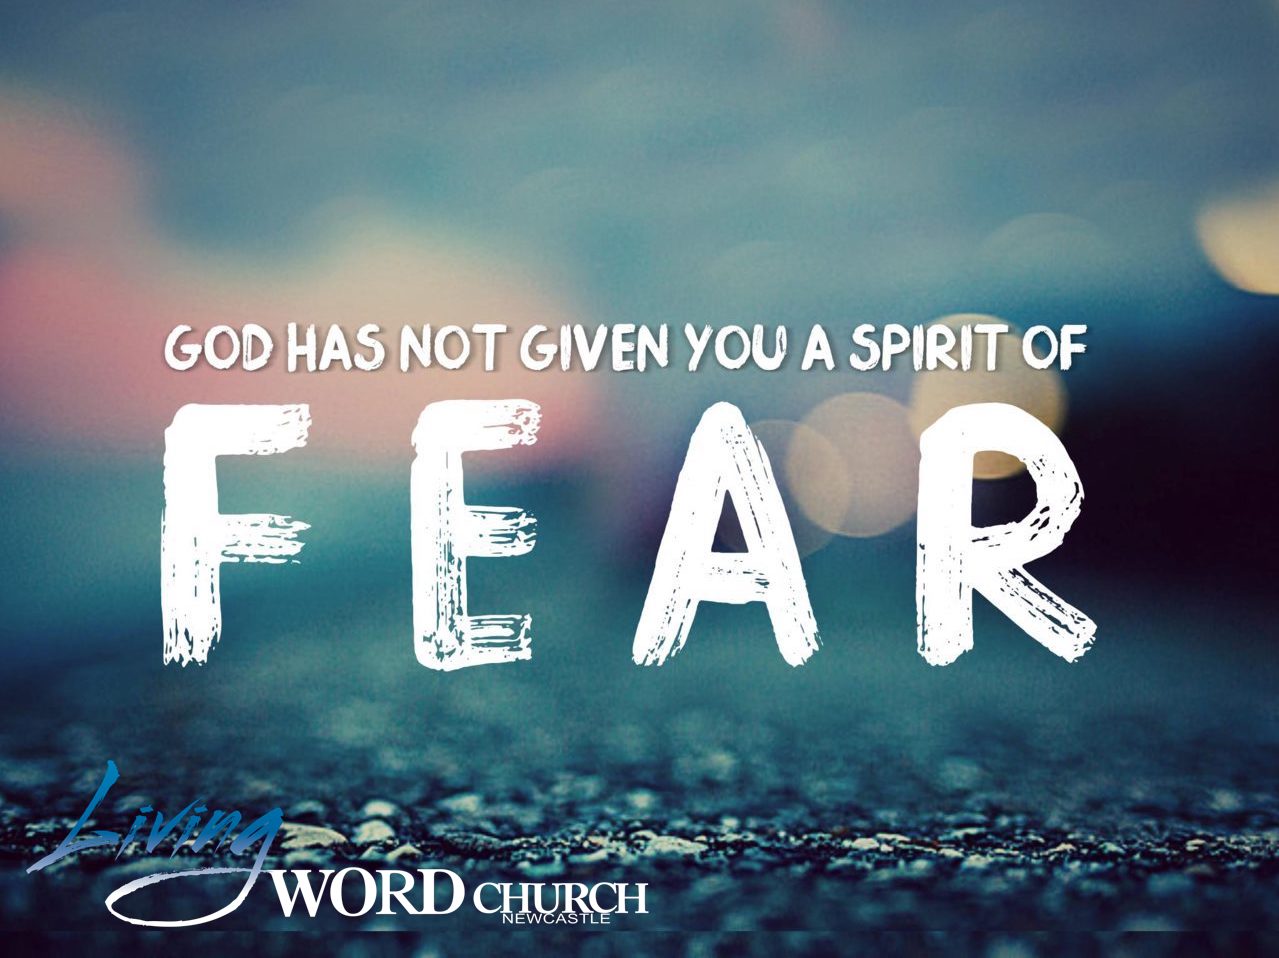 god has not given us a spirit of fear